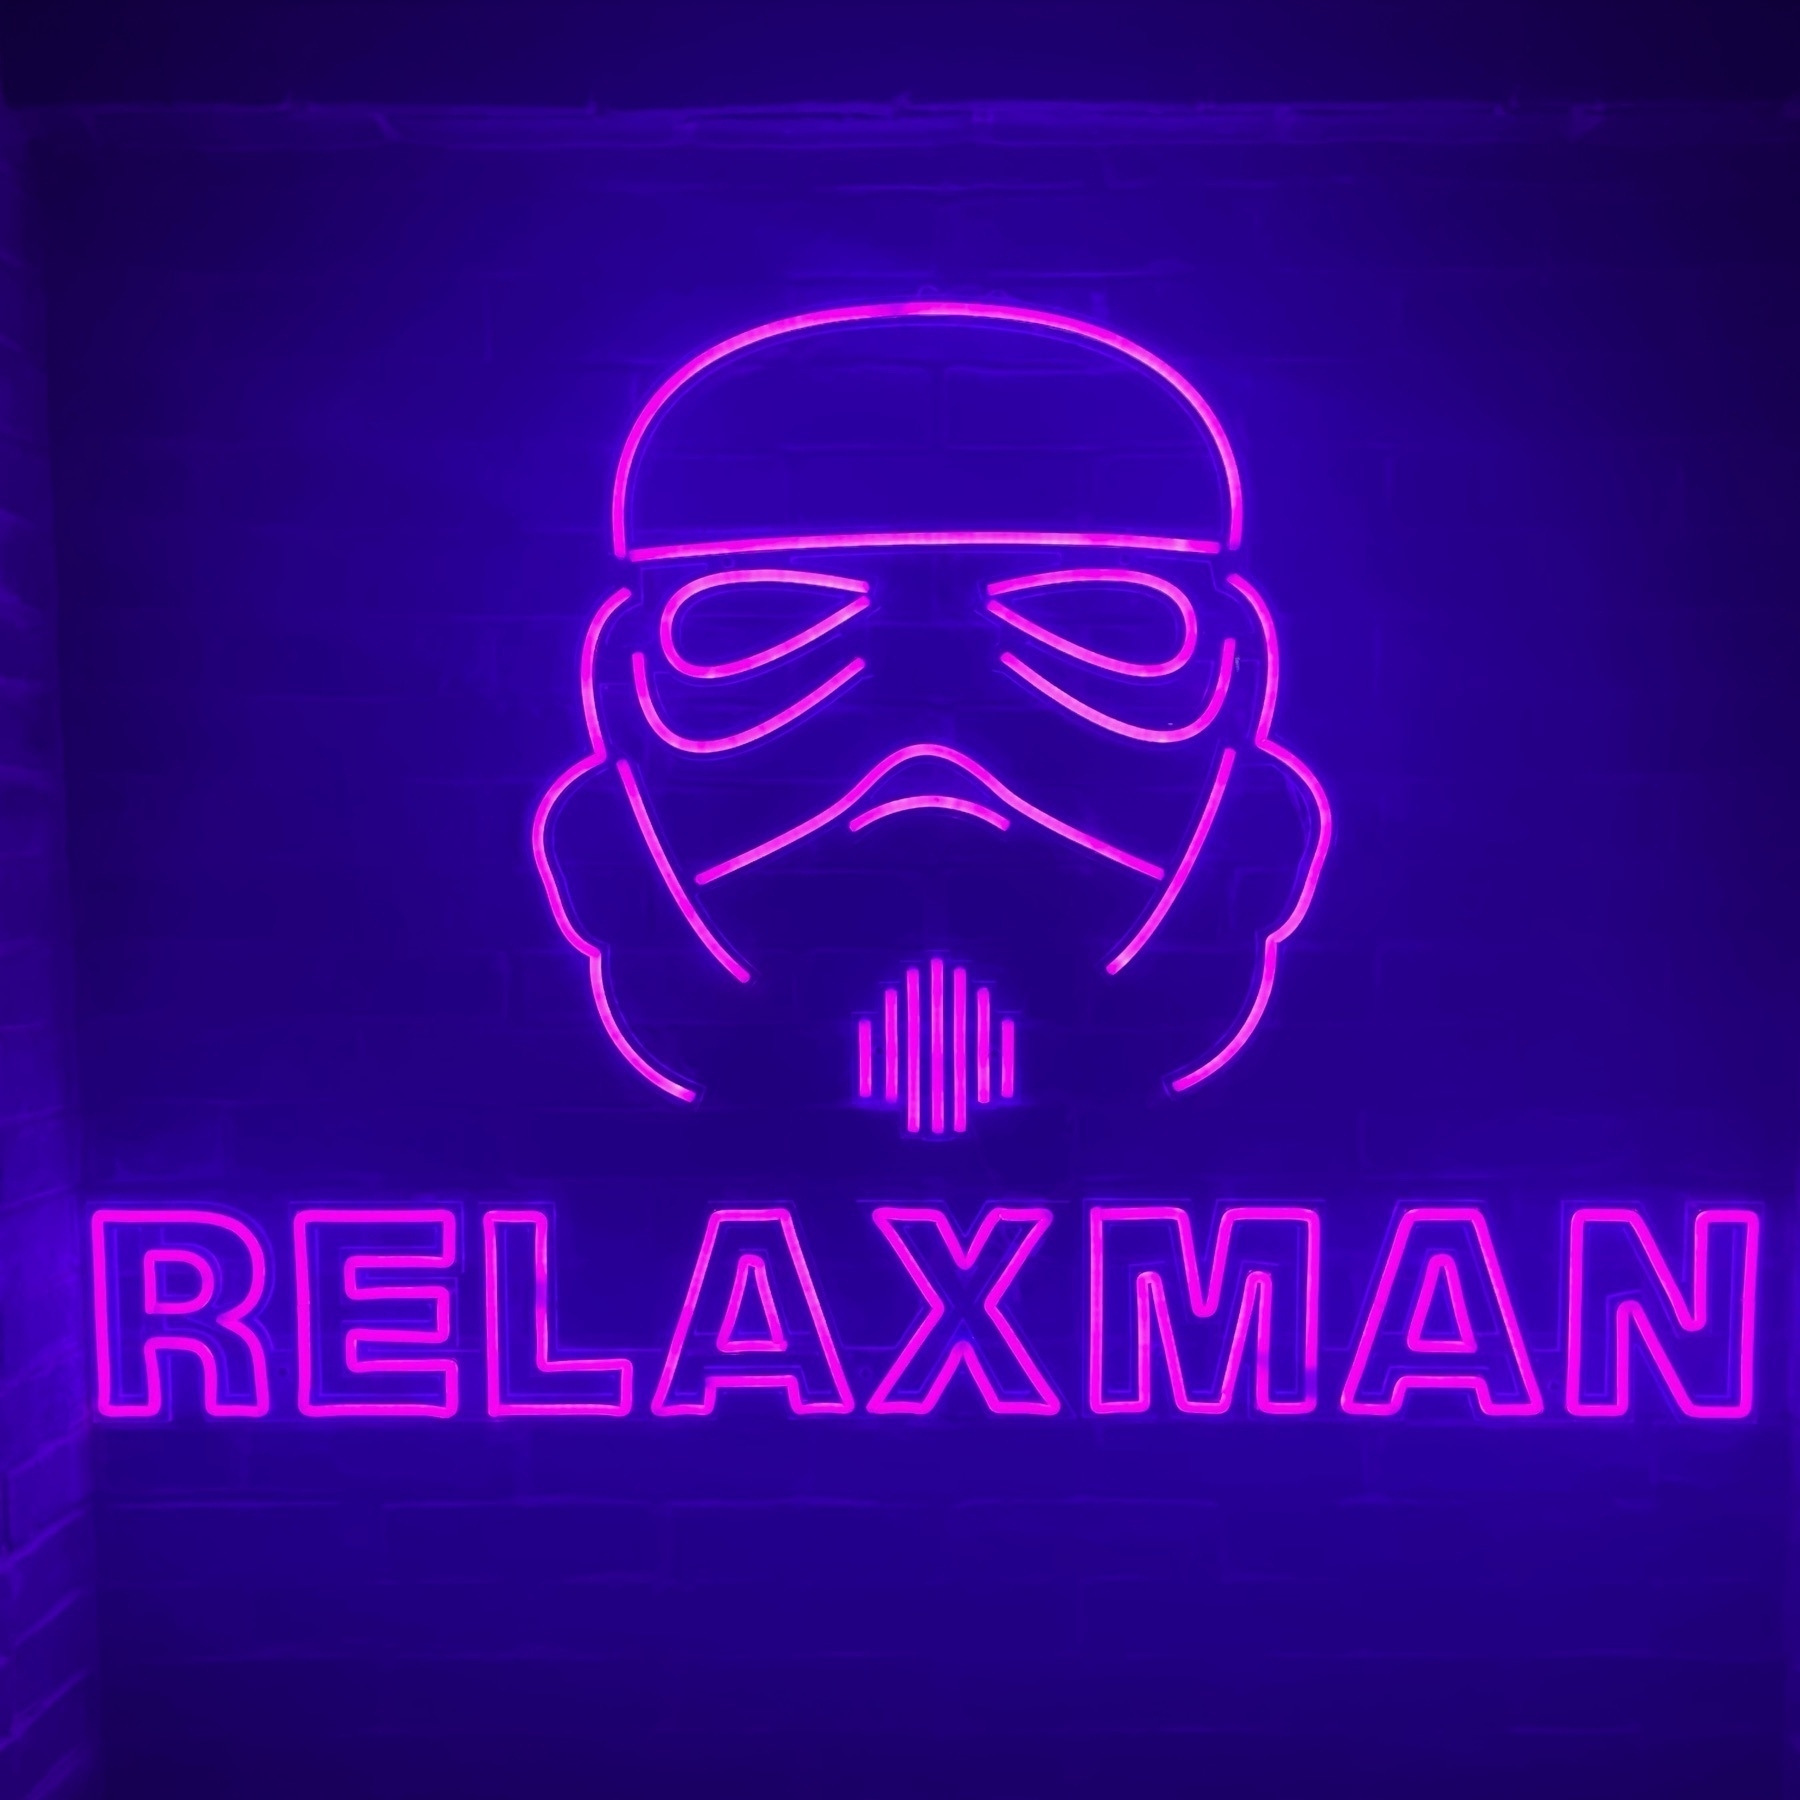 Stormtrooper outline in pink lighting with word “relaxman” underneath